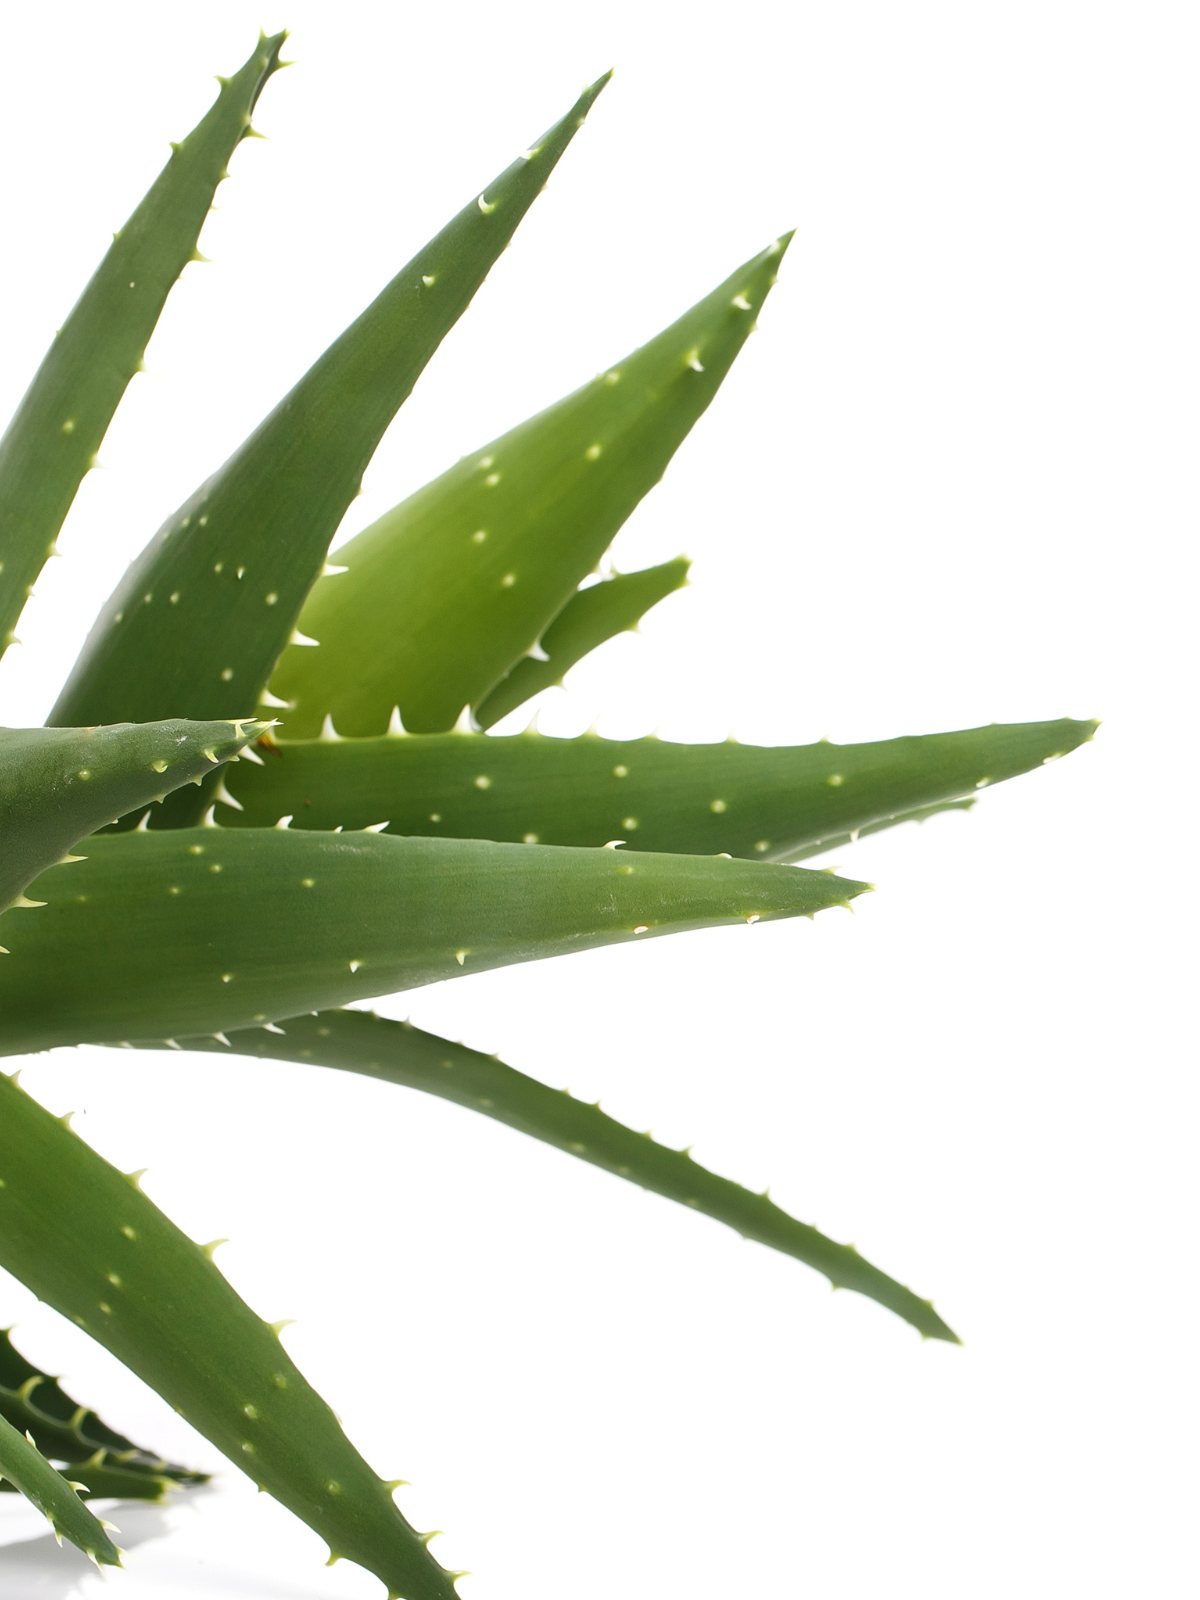 How to Grow and Care for Your Aloe Vera Plants